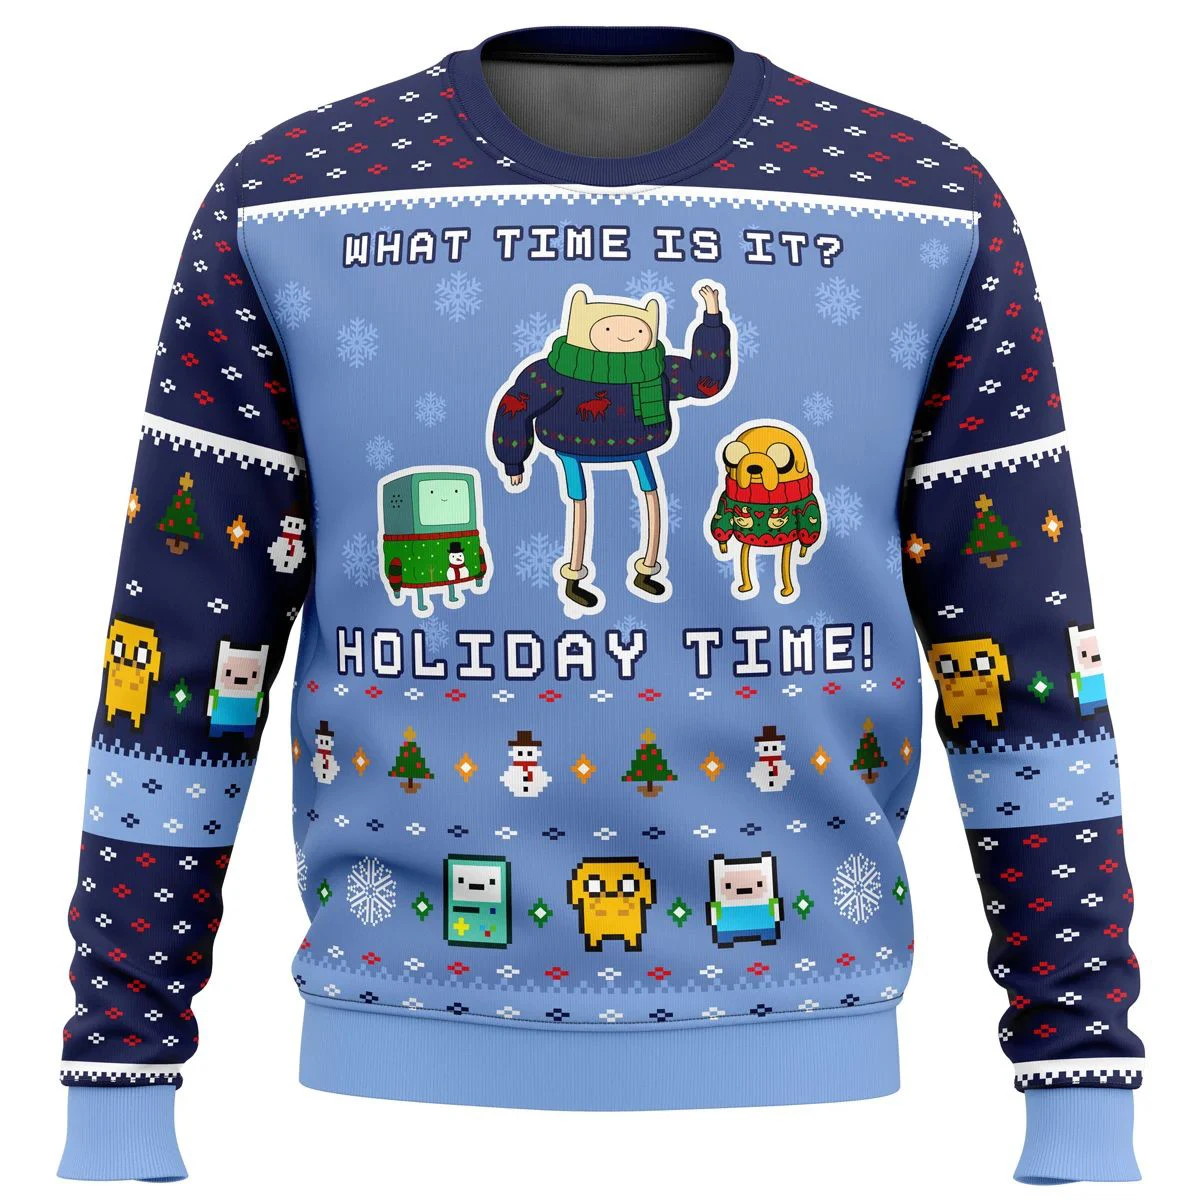 

Adventure Time Christmas Quest Ugly Christmas Sweater Christmas Sweater gift Santa Claus pullover men 3D Sweatshirt and top autu